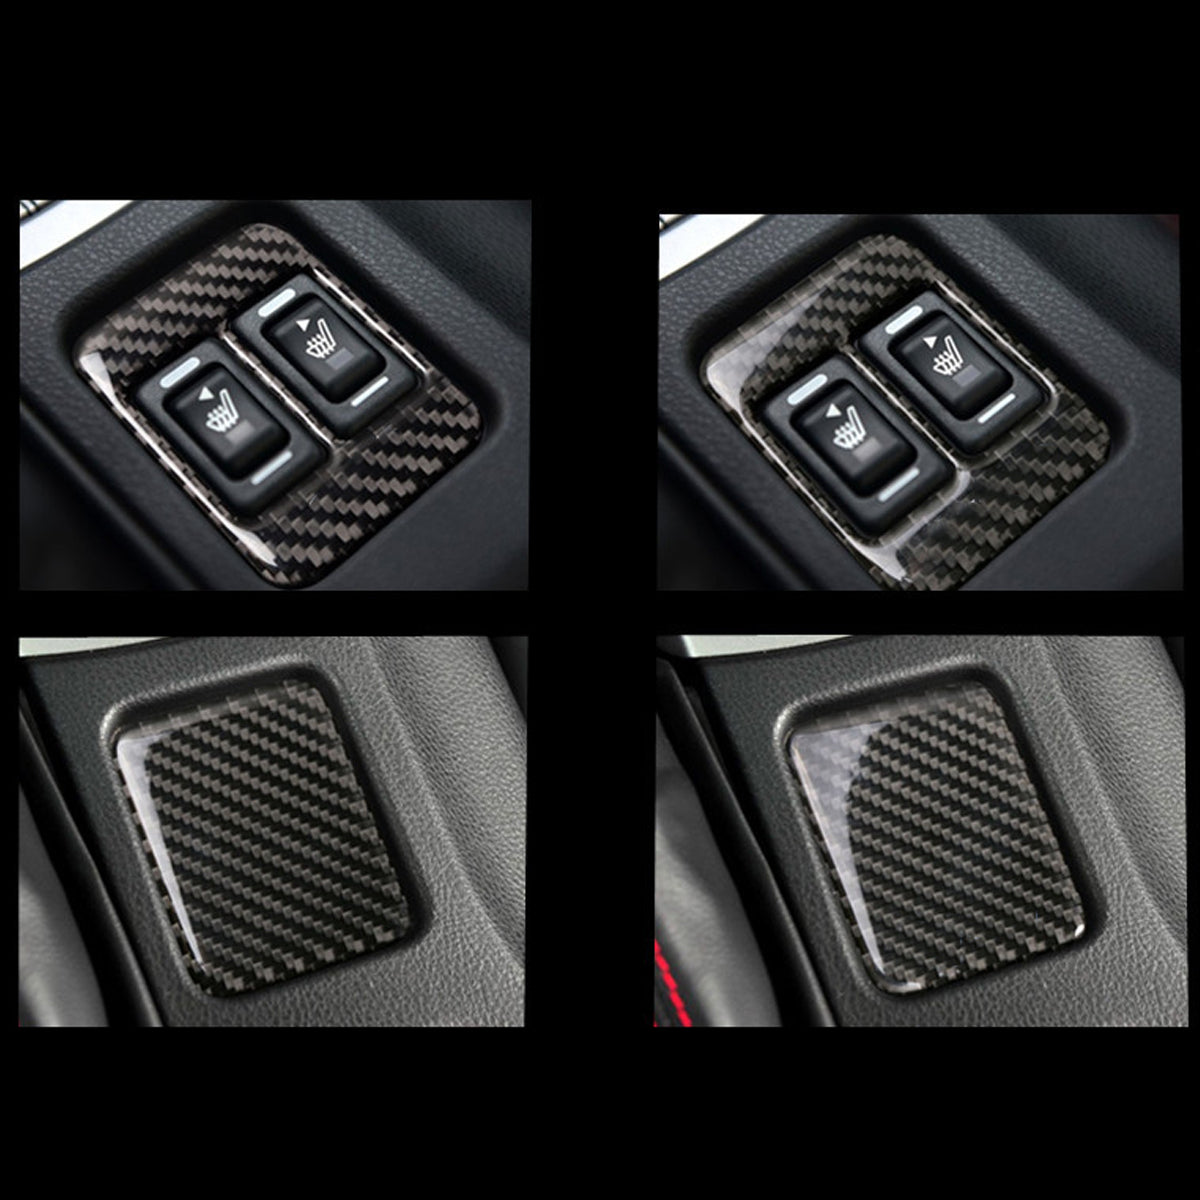 Dark Slate Gray Carbon fiber pattern central control seat electric heating button decoration is suitable for Toyota Subaru BRZ Toyota 86 2013-2019